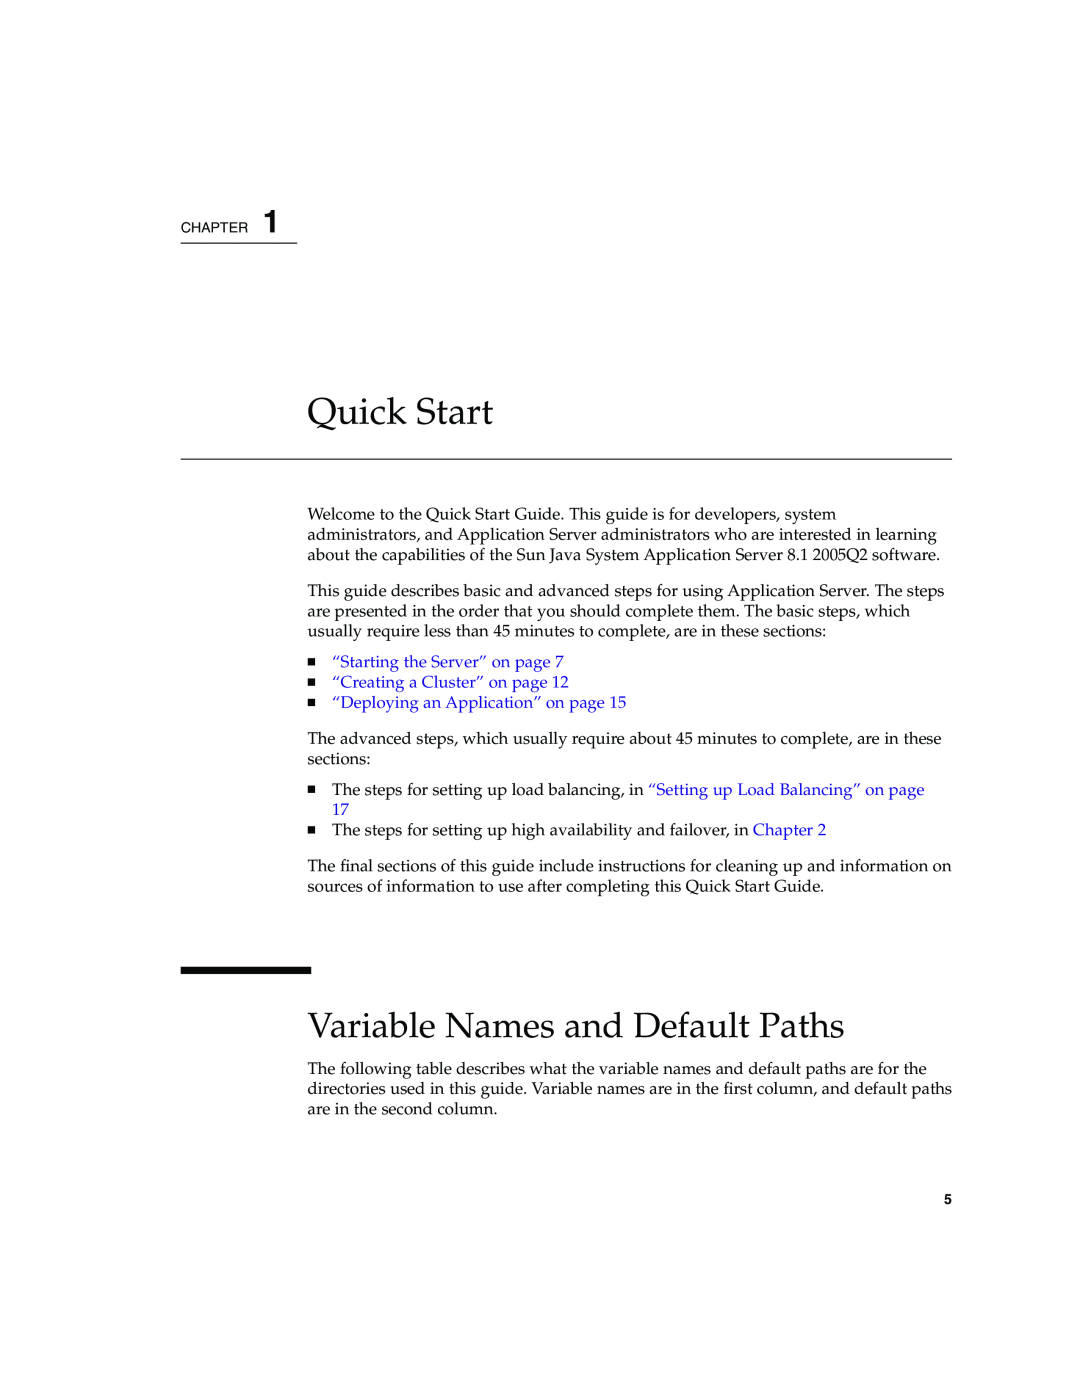 Sun Microsystems 2005Q2 quick start Quick Start, Variable Names and Default Paths, “Deploying an Application” on page 